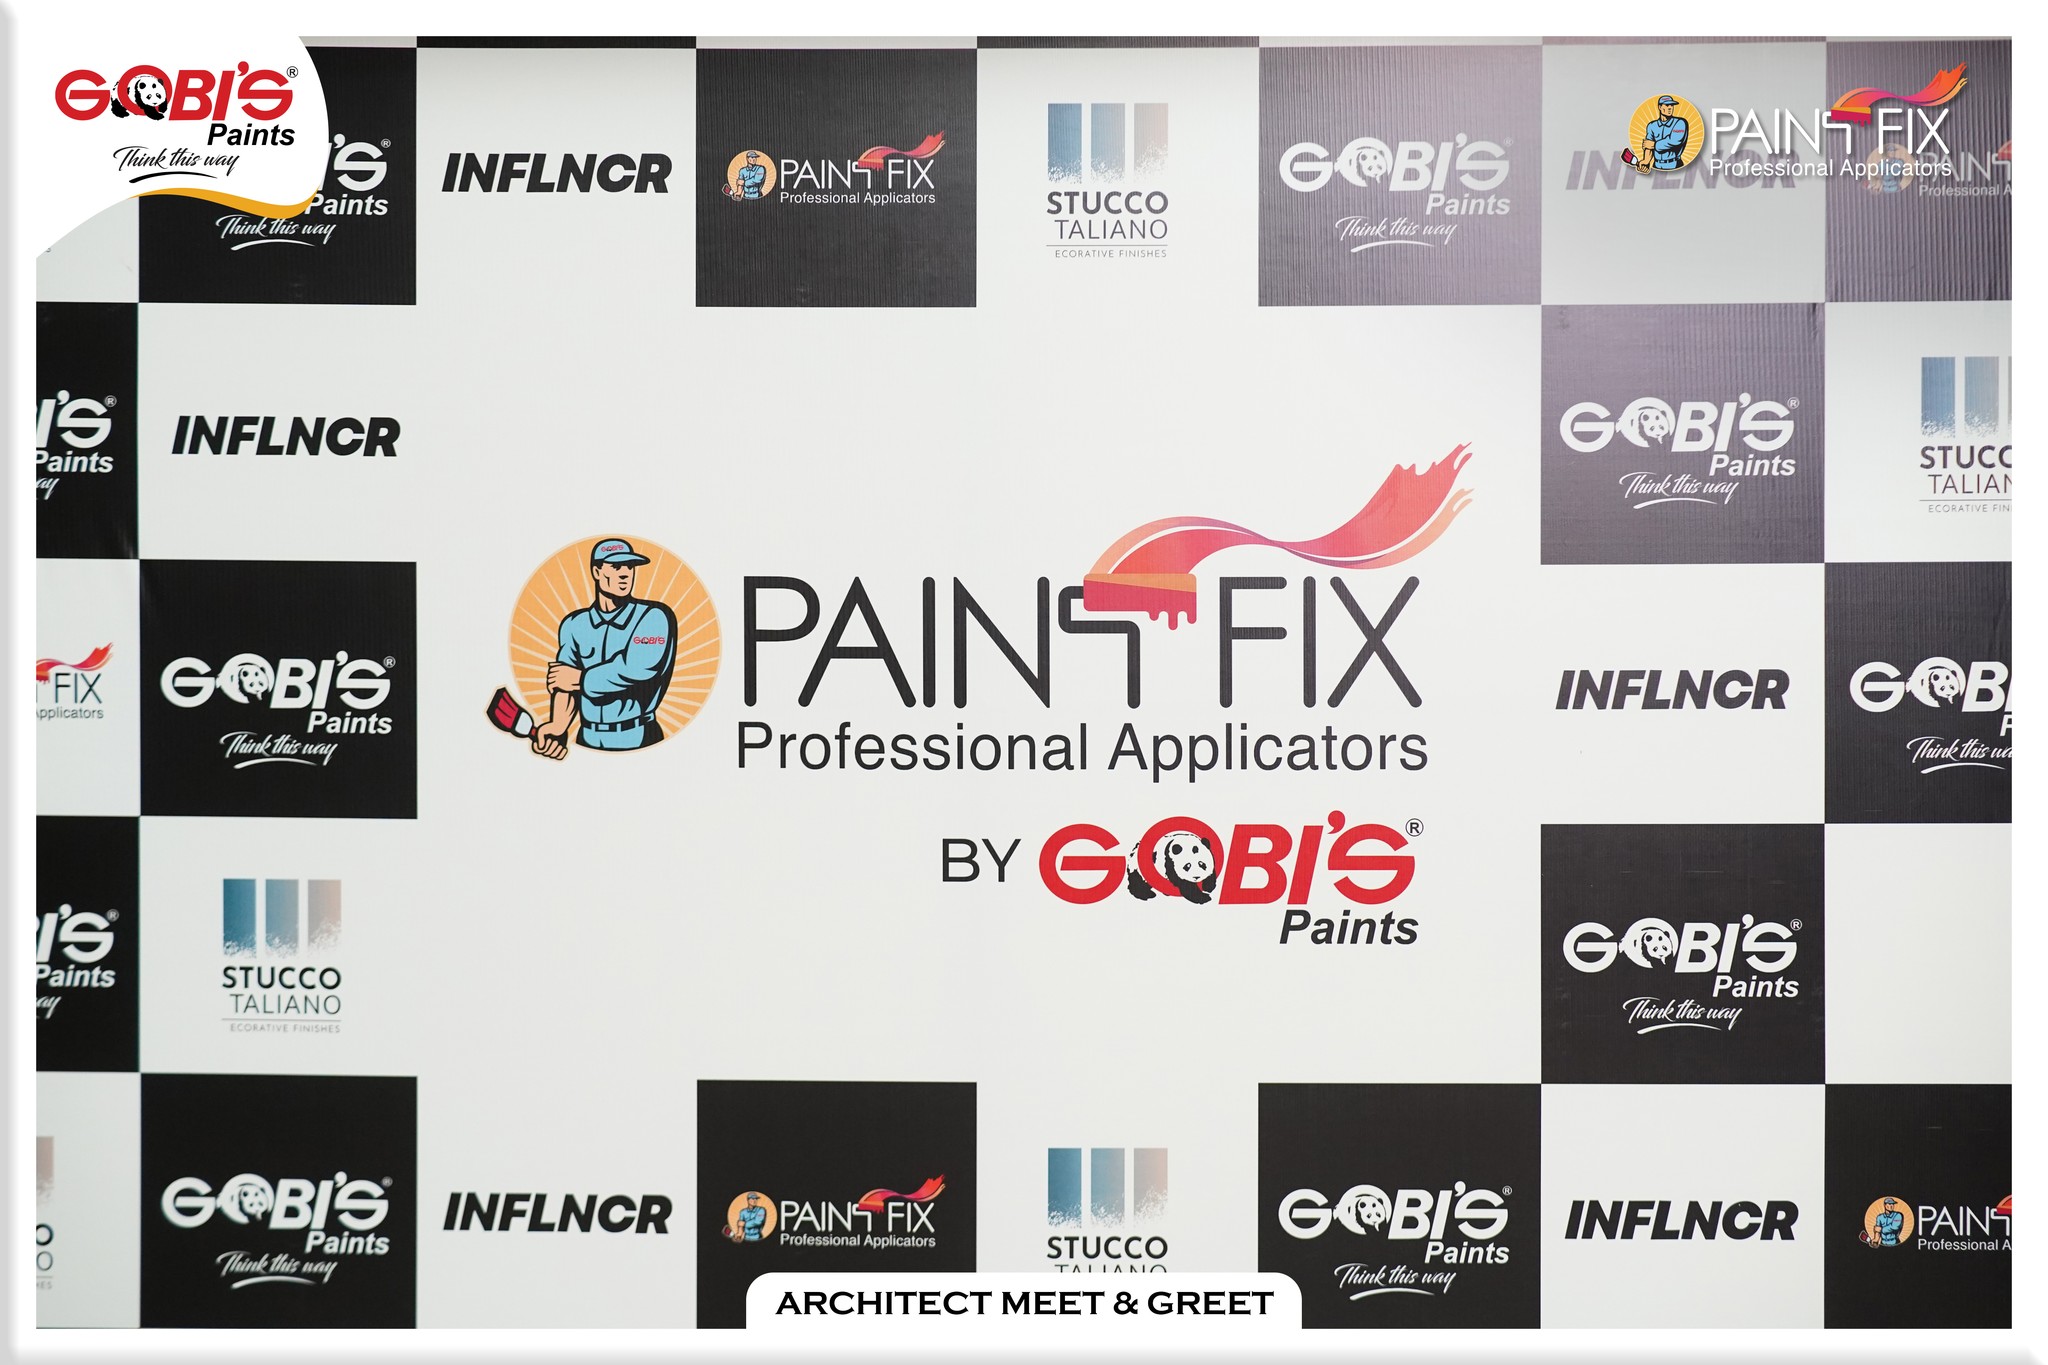 Gobi’s Paints organized a successful Architect Meet & Greet on August 25th